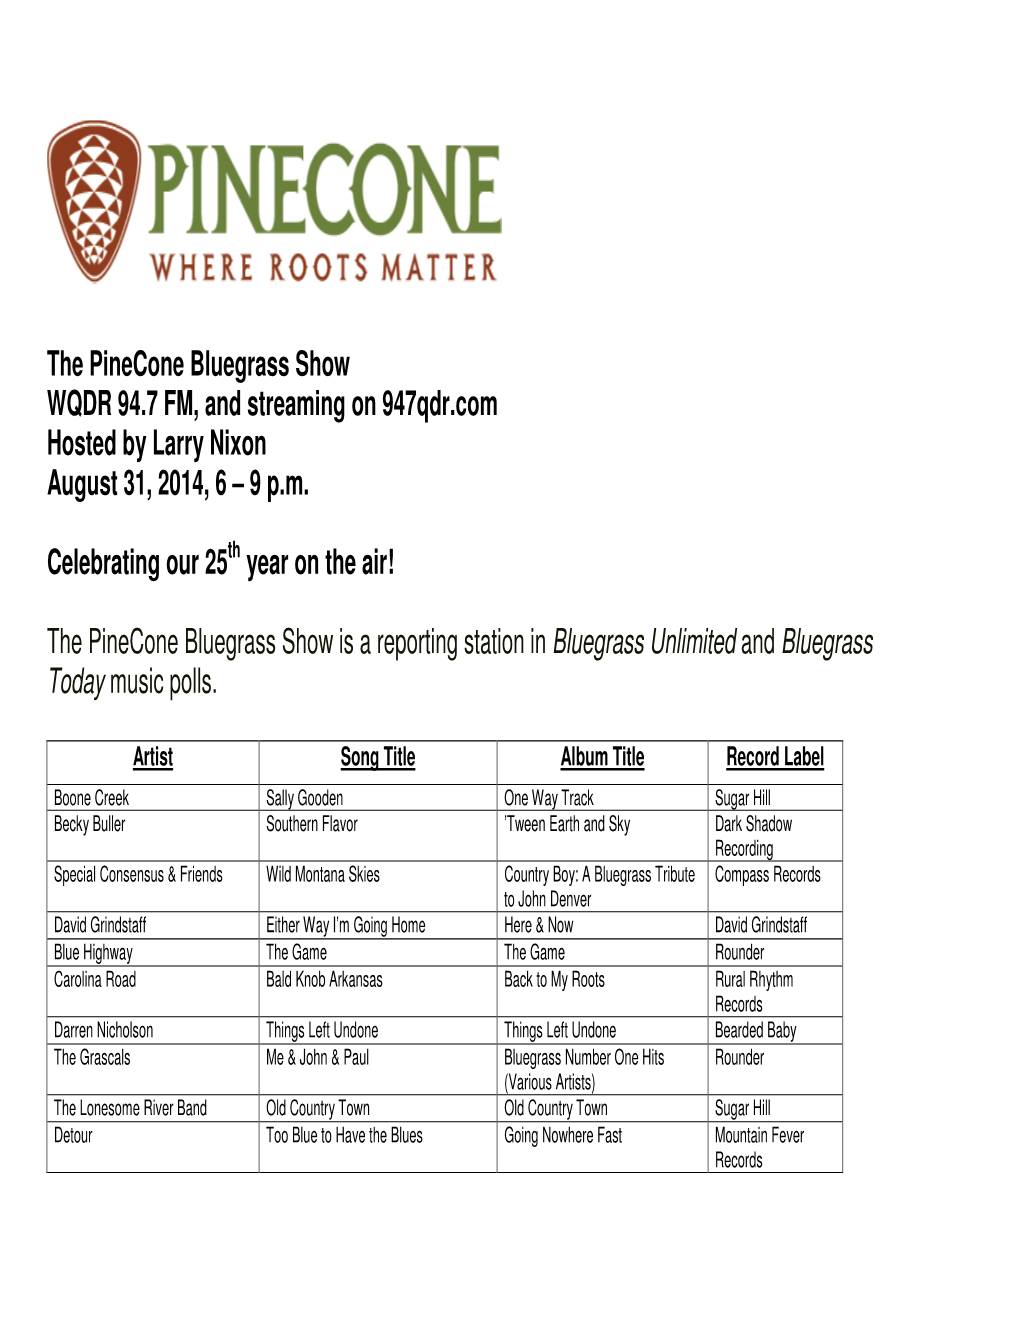 The Pinecone Bluegrass Show WQDR 94.7 FM, and Streaming on 947Qdr.Com Hosted by Larry Nixon August 31, 2014, 6 – 9 P.M